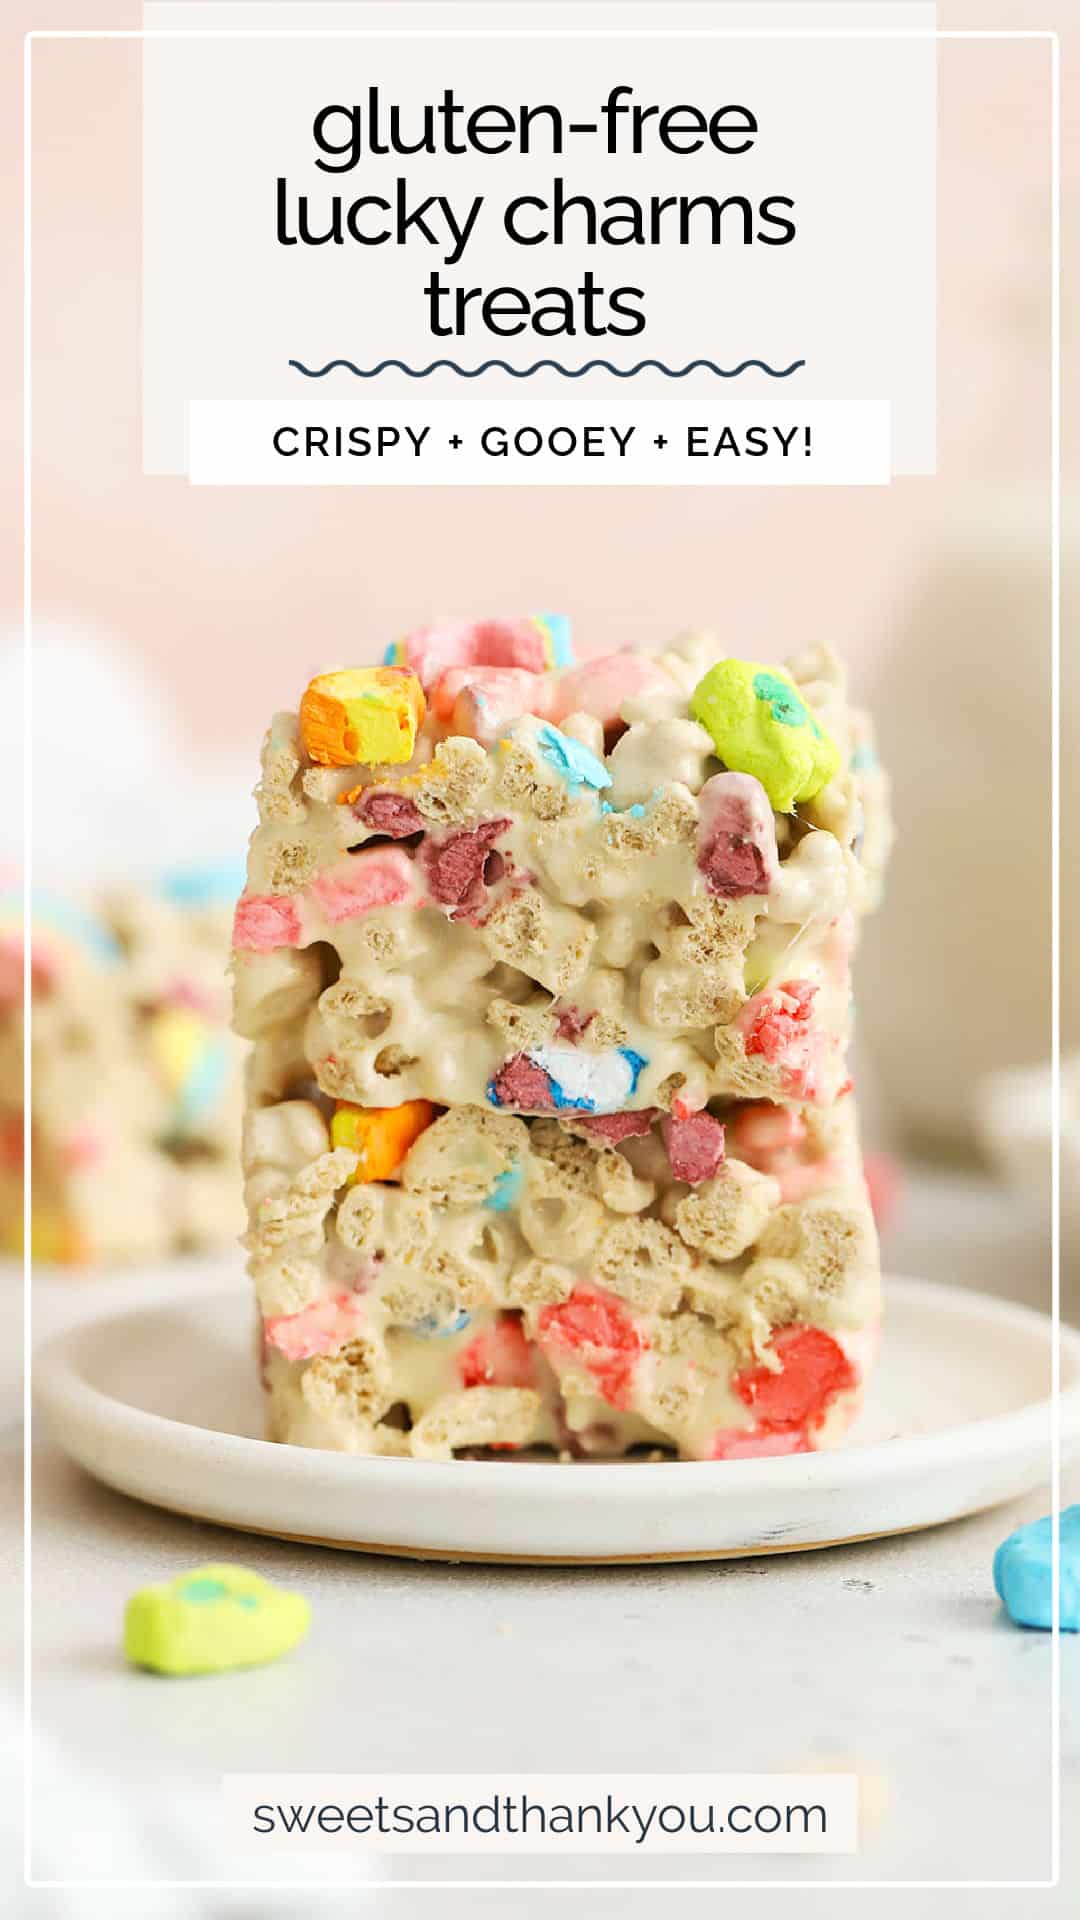 This Lucky Charms Treats recipe is a magically delicious St. Patrick's Day treat to share with your family! Quick, easy & no-bake, too! / lucky charms marshmallow treats / lucky charms cereal treats / lucky charms rice krispie treats / lucky charms rice crispy treats / lucky charms rice krispies treats / gluten-free st. patricks day dessert / St. Patrick's Day treats / rainbow dessert / gluten-free cereal treats / no bake recipe / gluten-free cereal bars / lucky charms cereal bars /